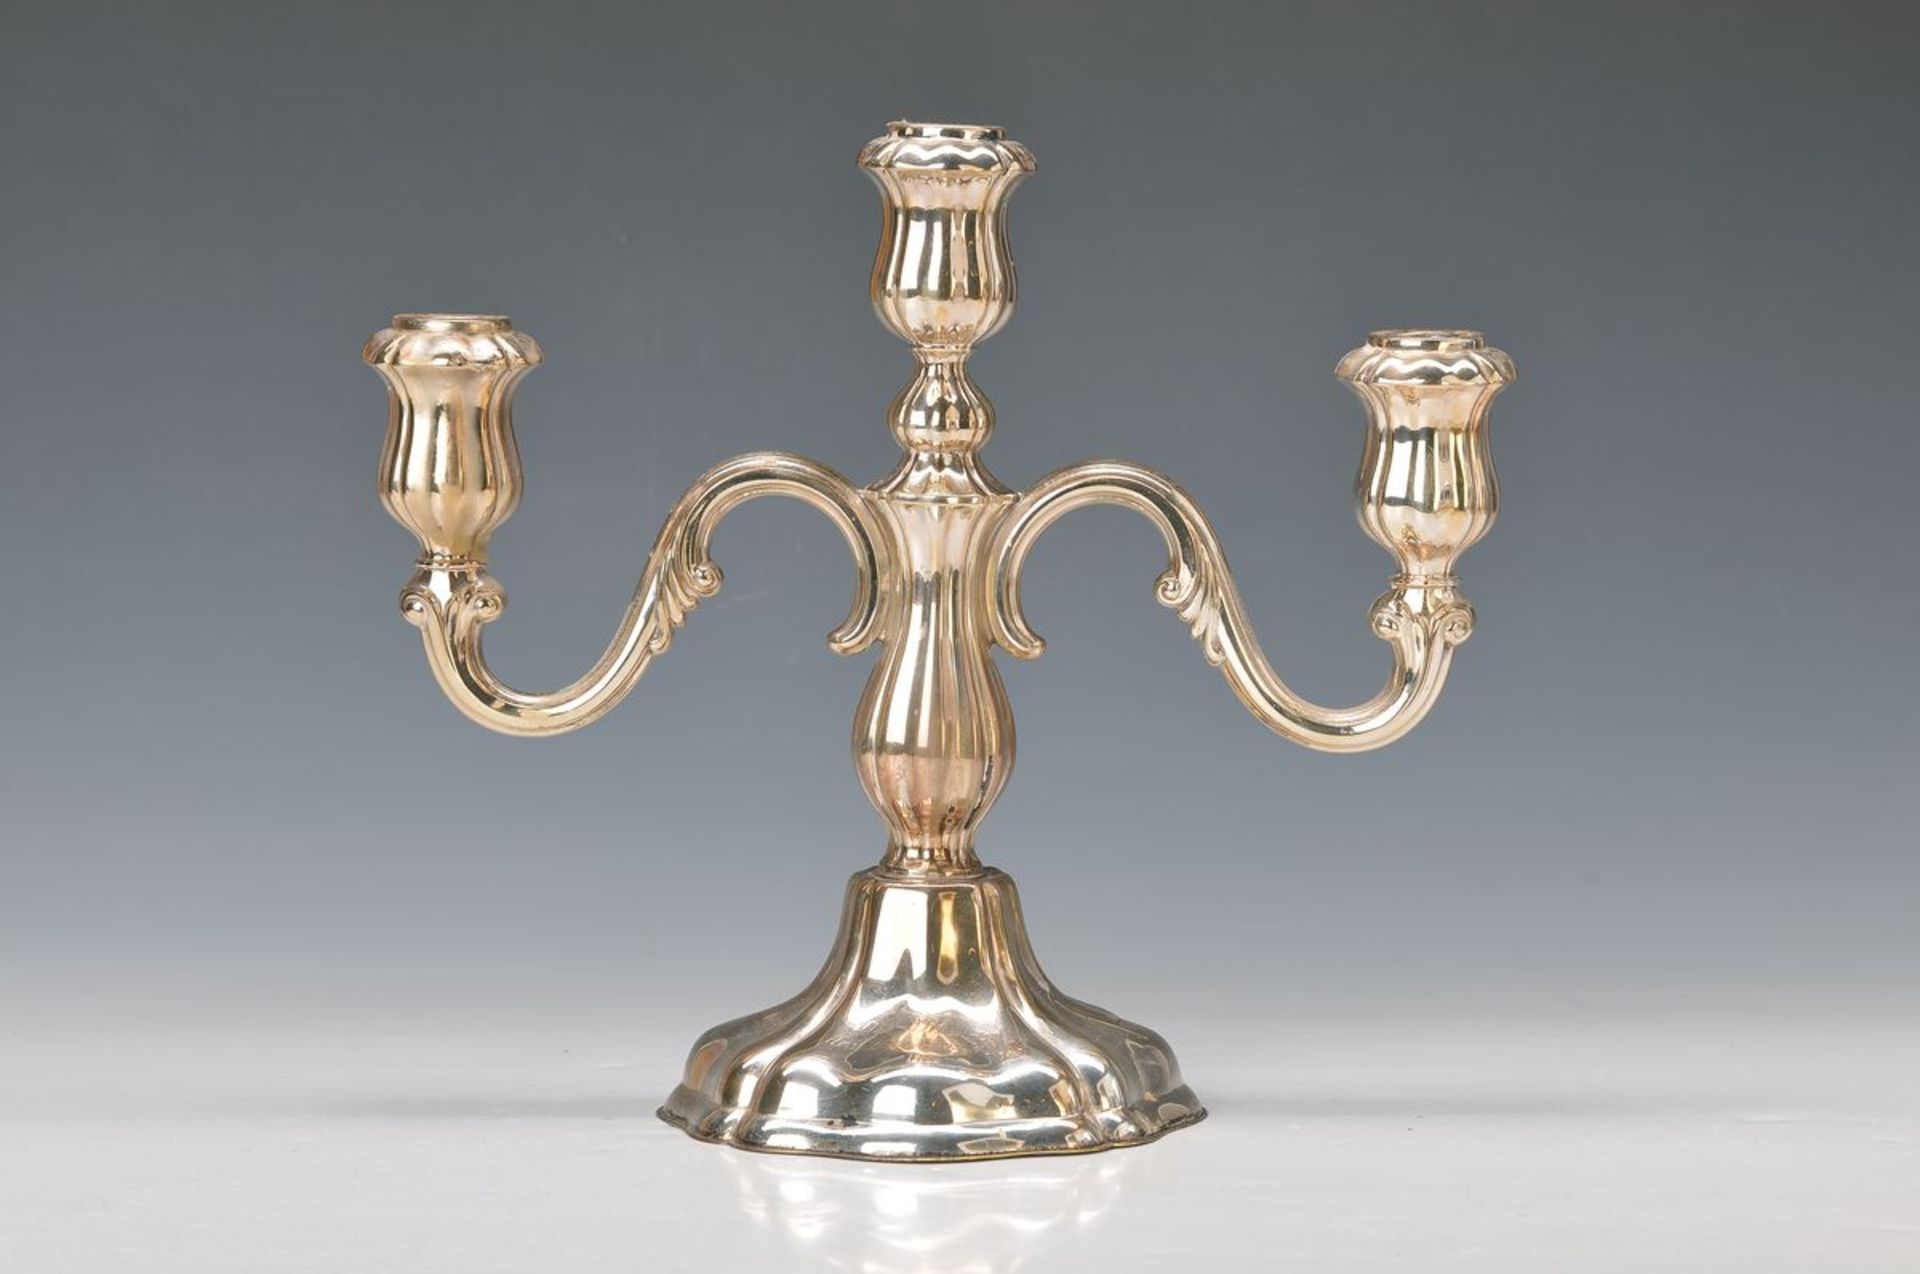 candlesticks, German, 1930s, 830 silver, threefocal points, Baroque style, H. approx. 28cm, W